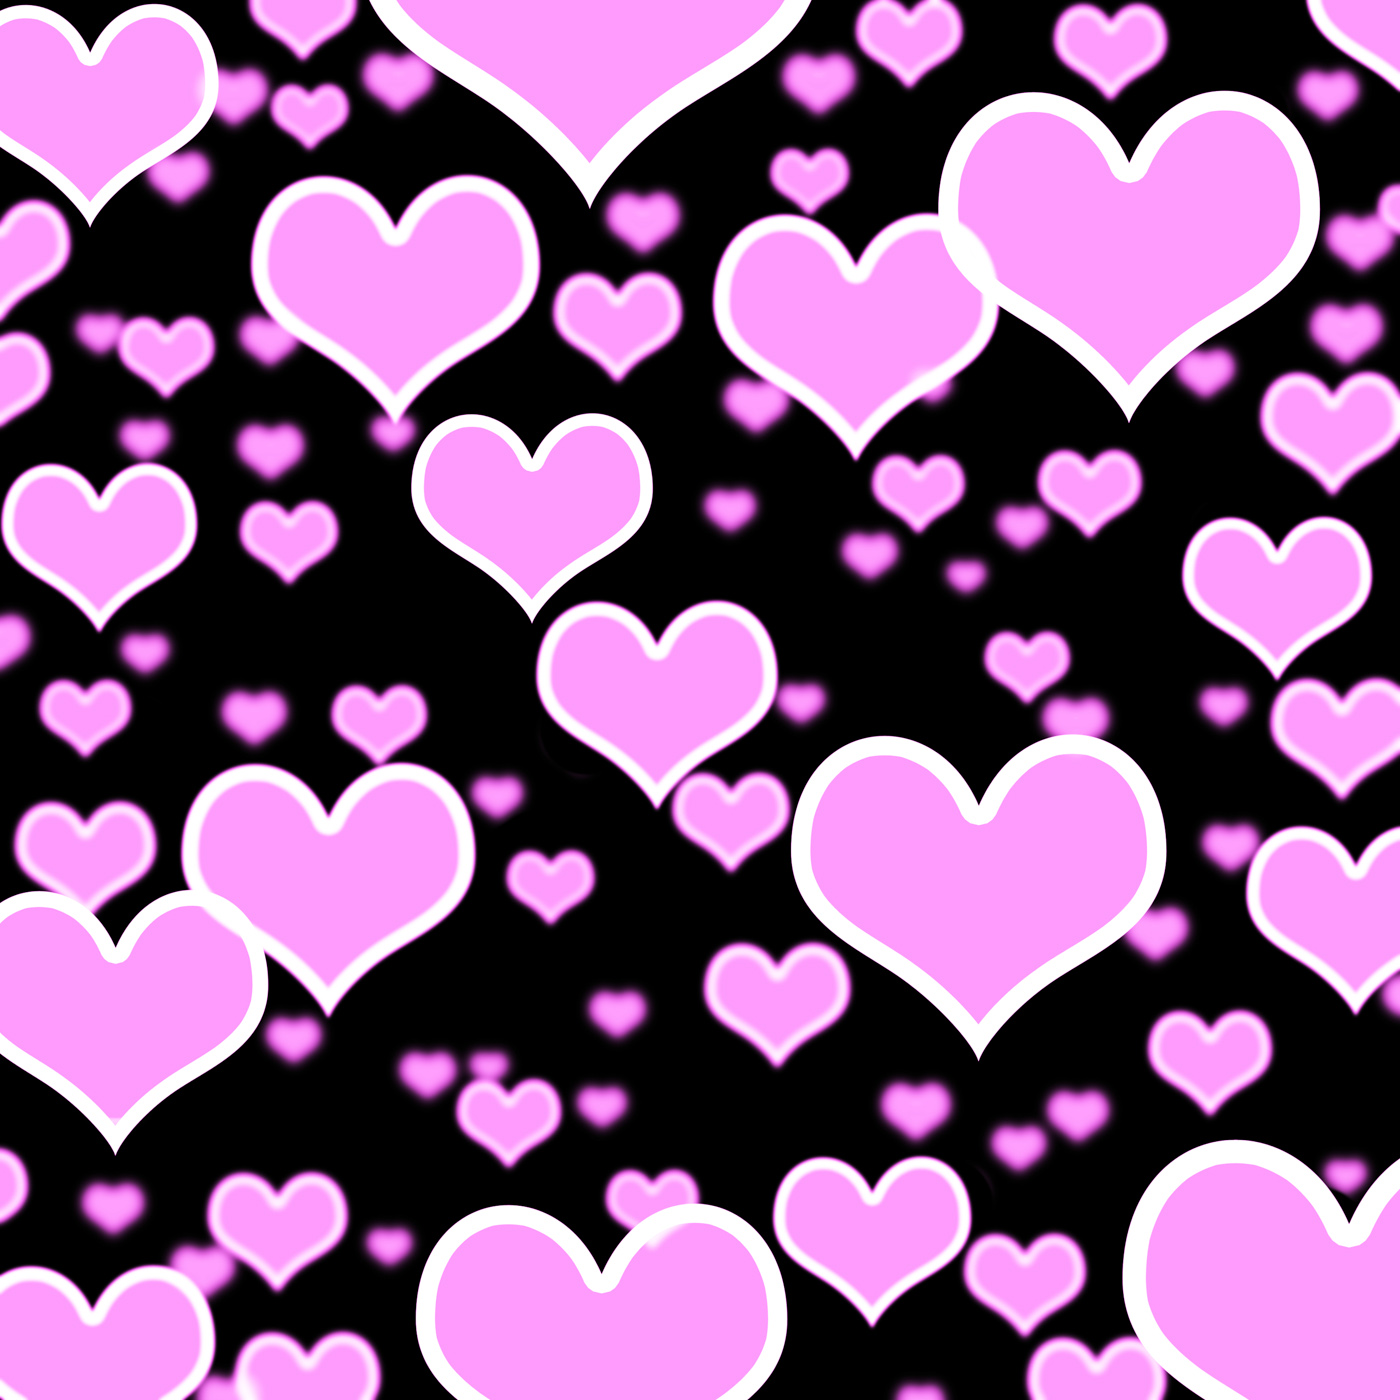 Lilac hearts bokeh background on black showing love romance and valent photo